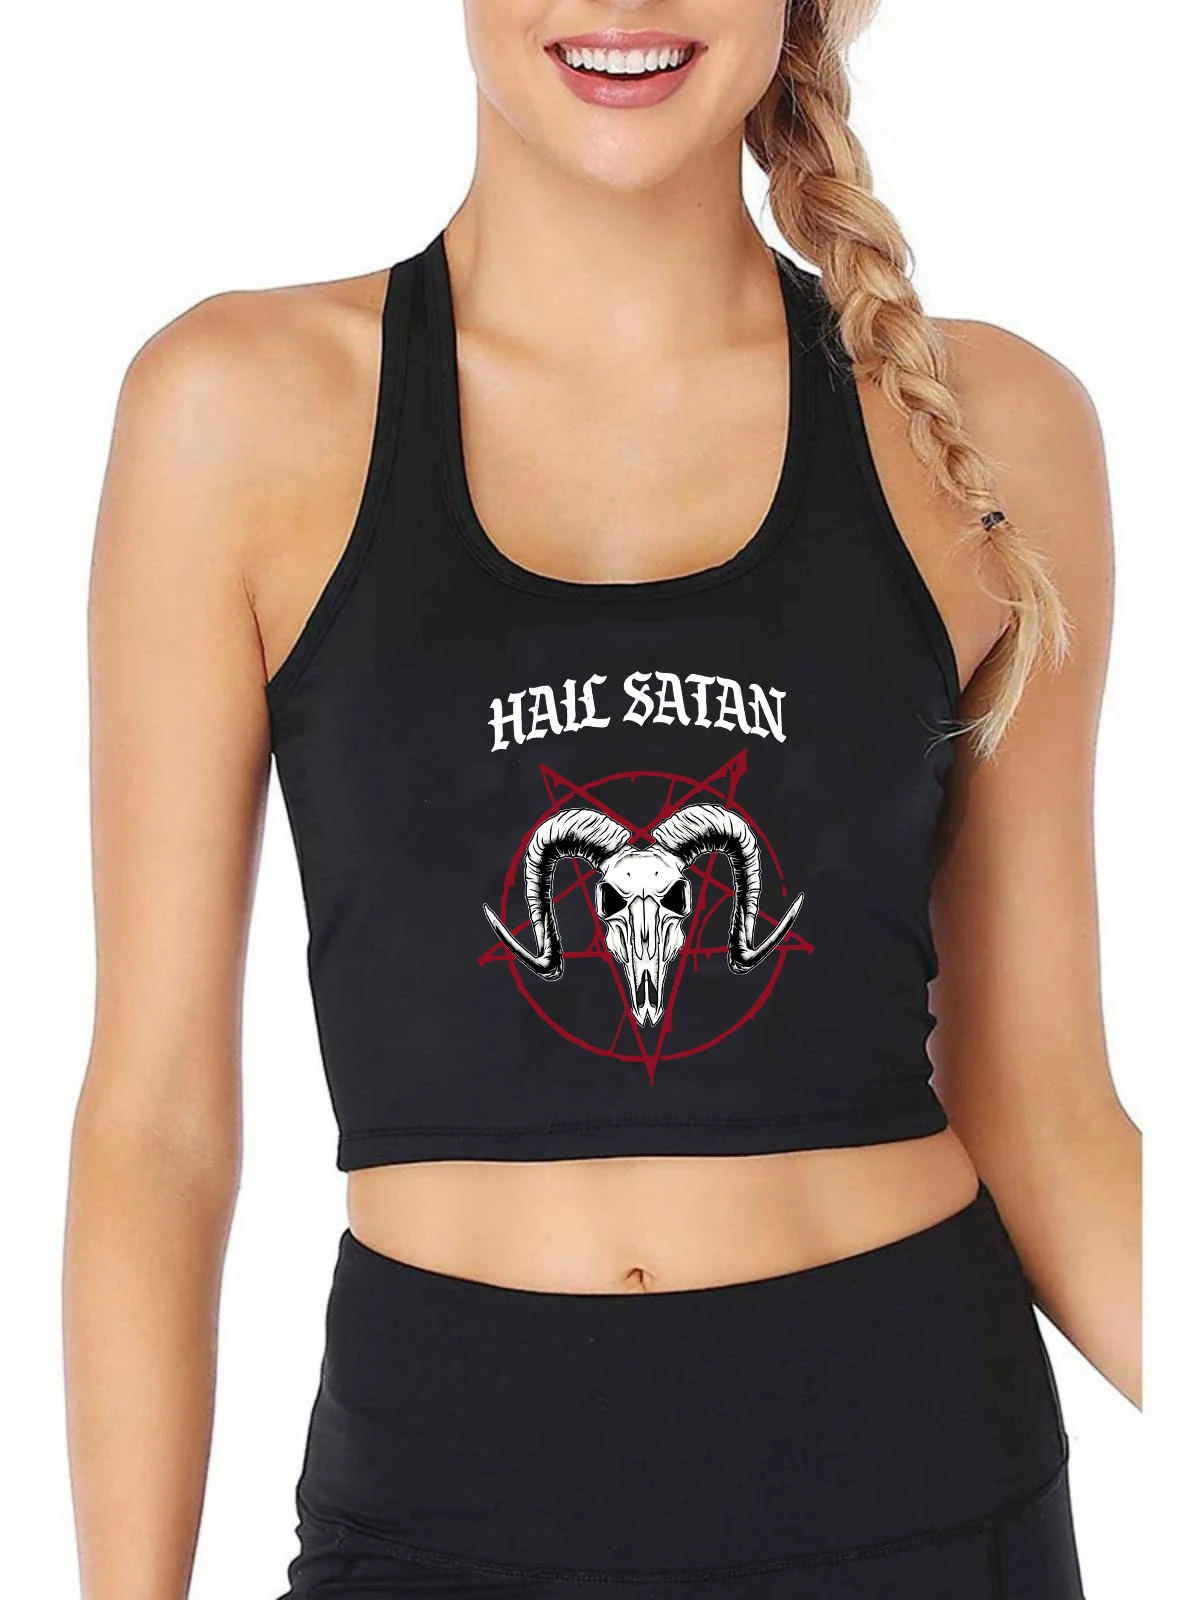 

Hail Satan Goat Skull And Pentagram Pattern Tank Tops Women's Personality Breathable Slim Fit Crop Top Gym Camisole